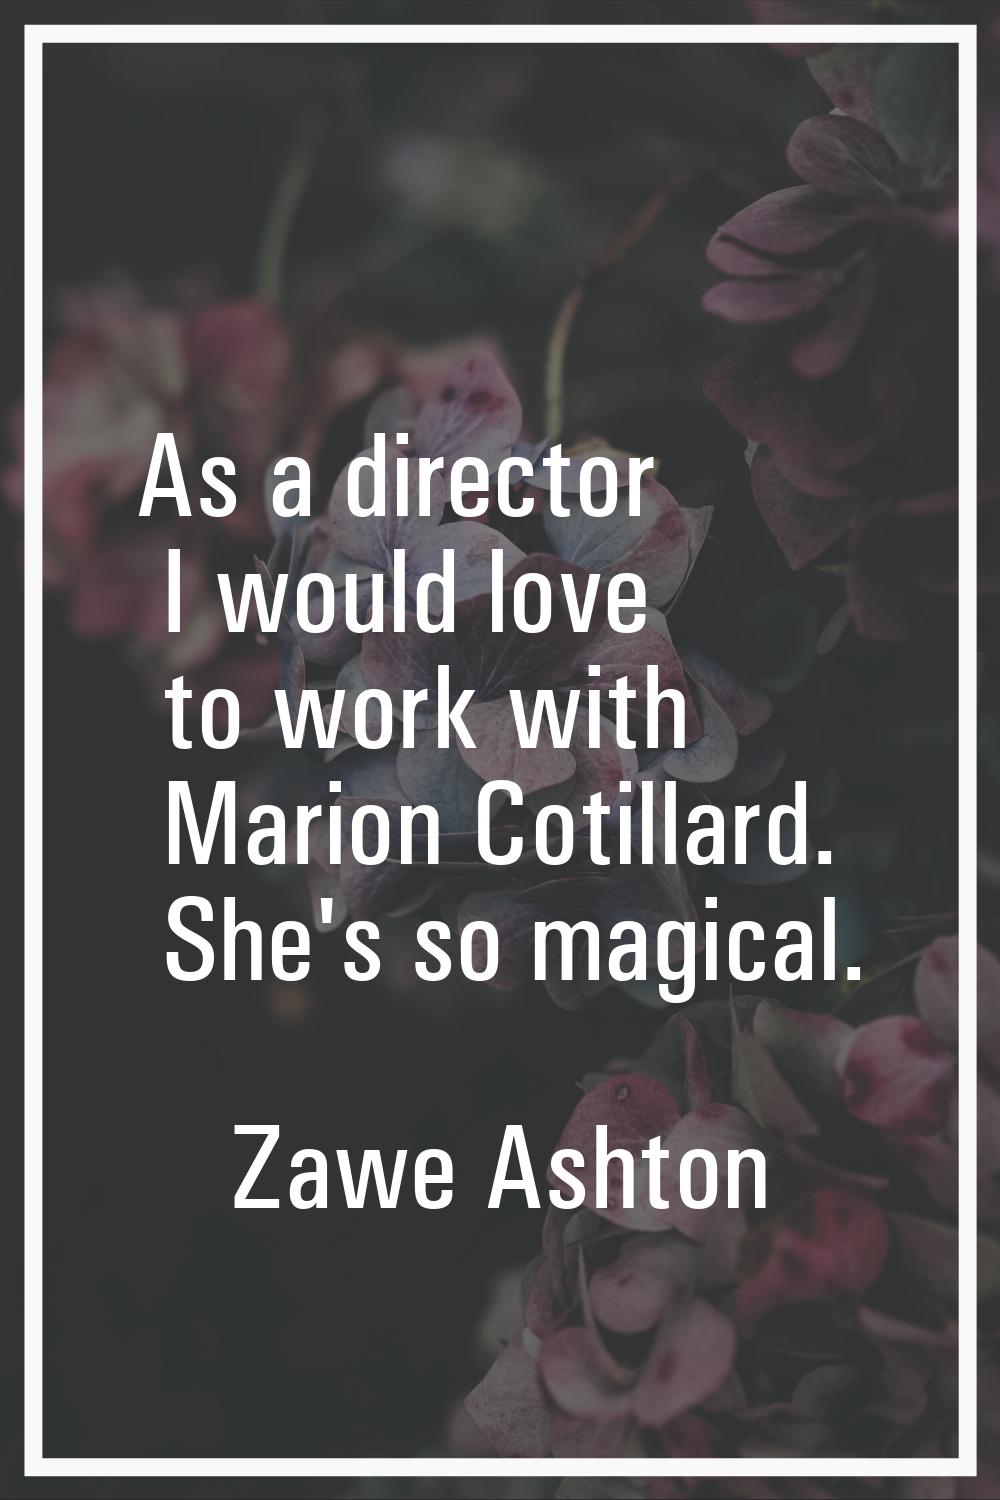 As a director I would love to work with Marion Cotillard. She's so magical.